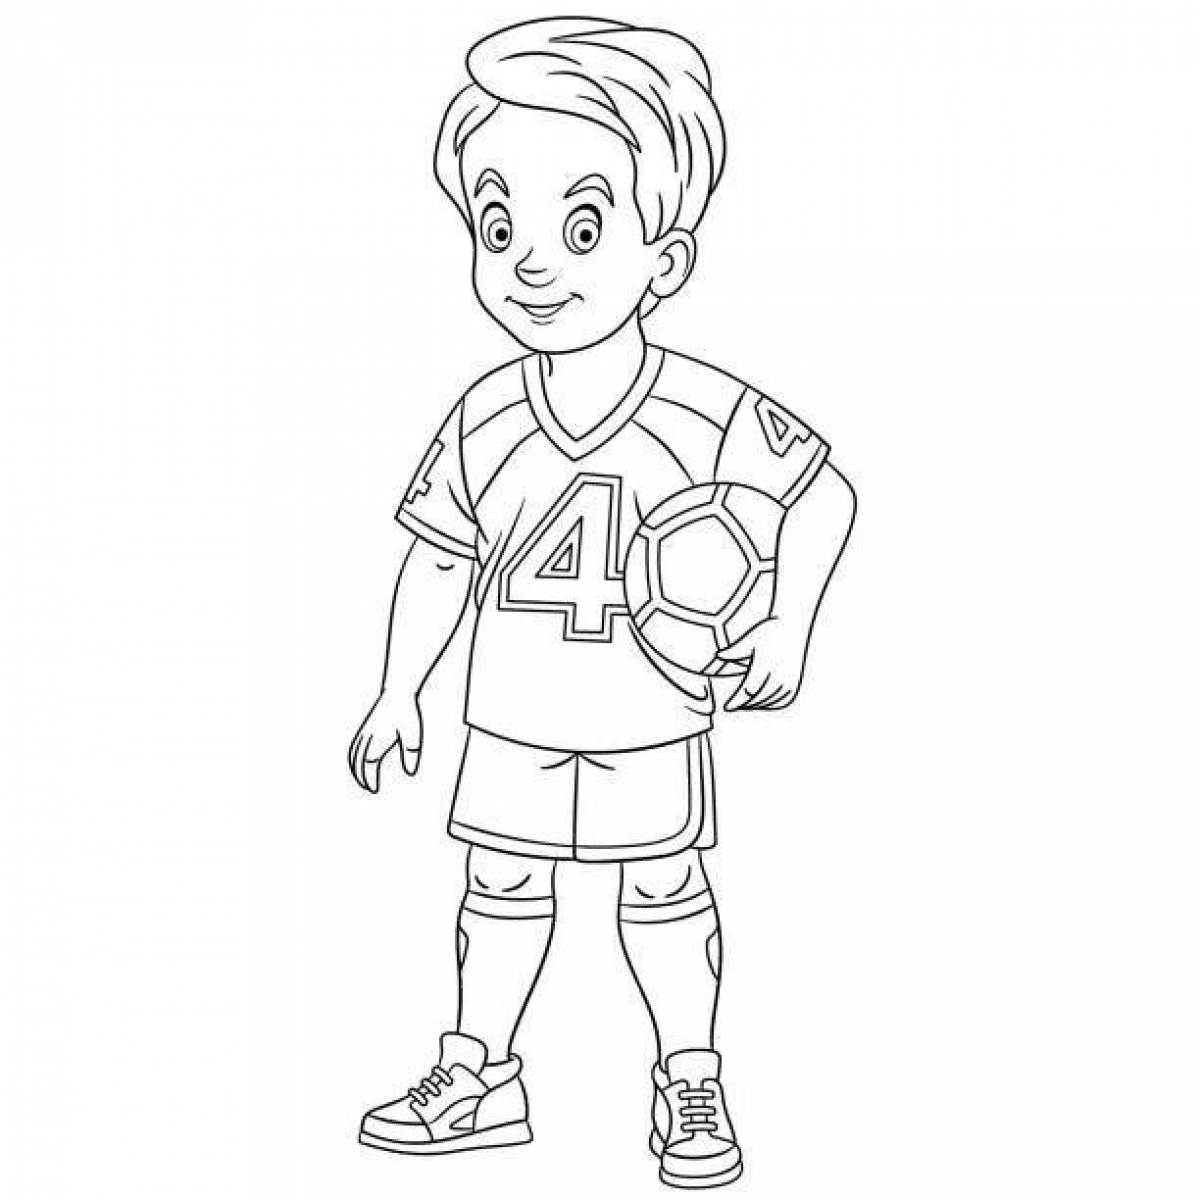 Coloring page determined boy football player